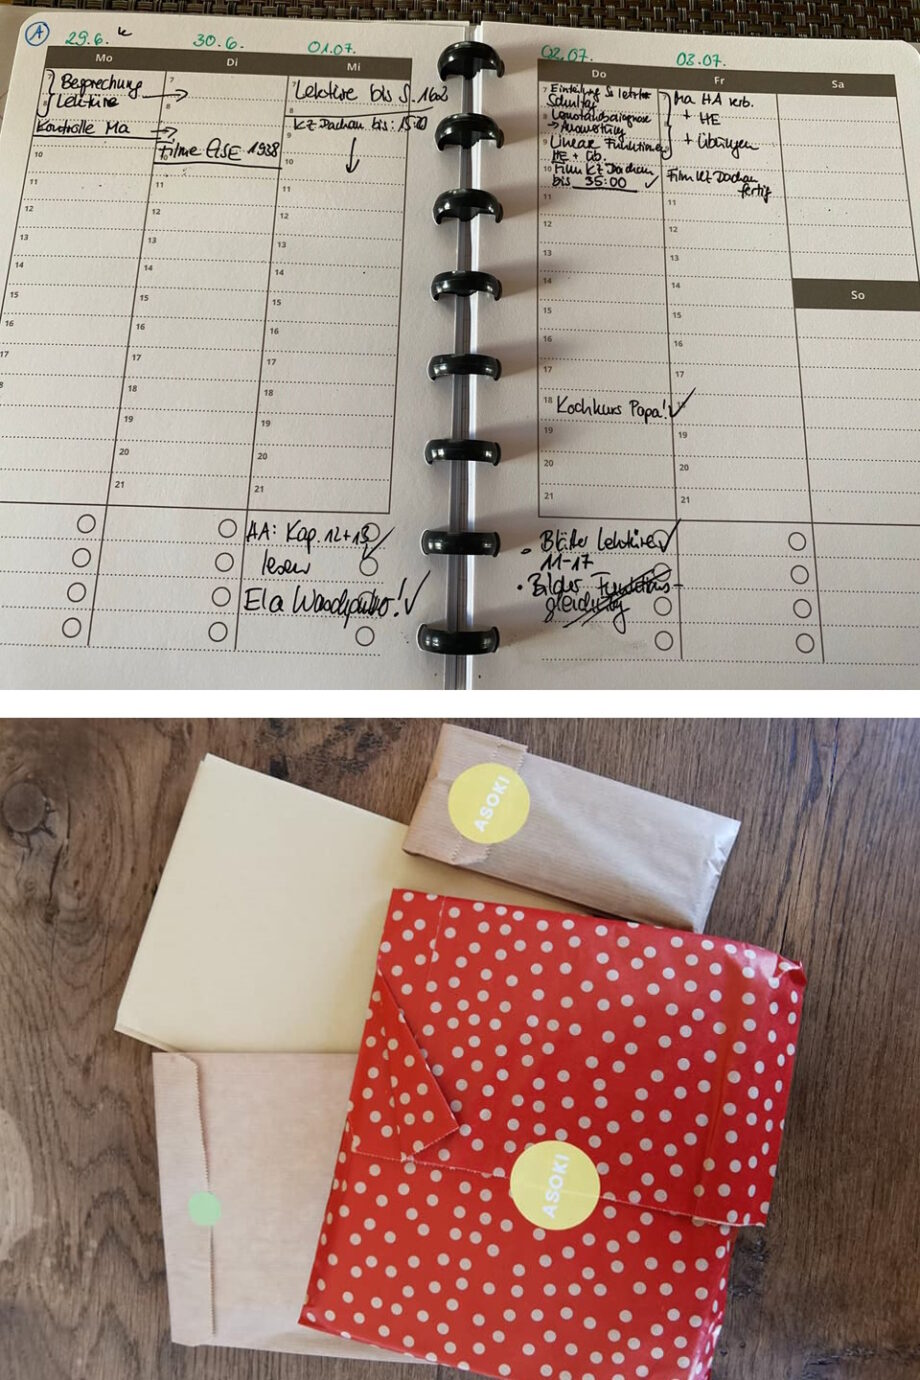 Erasable planner pictures by Susanne and